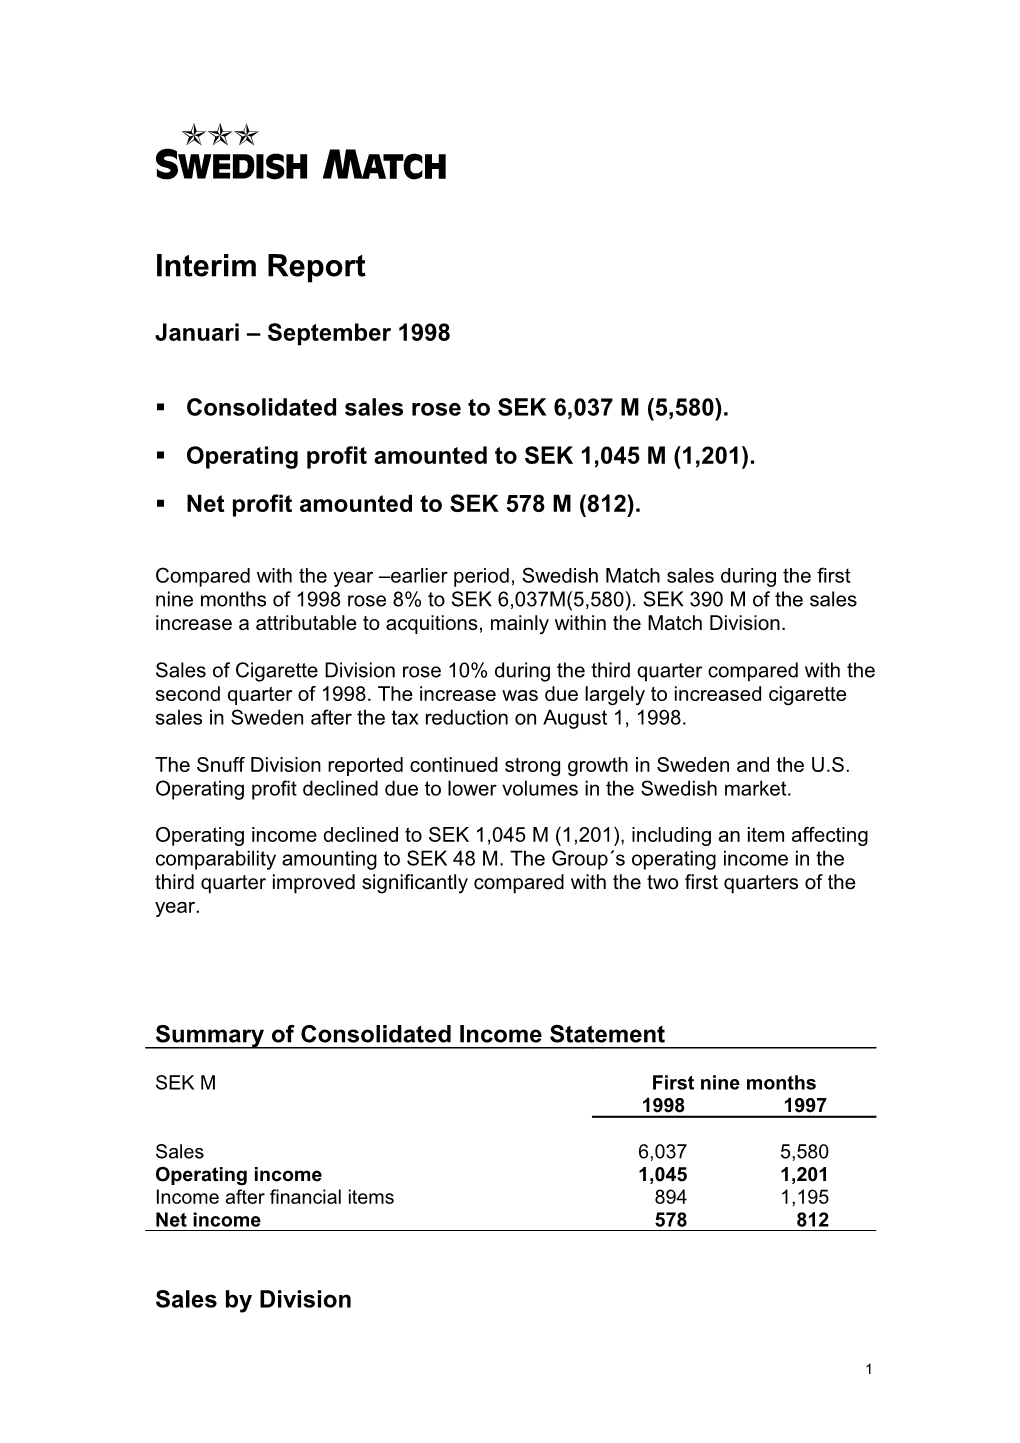 Consolidated Sales Rose to SEK 6,037 M (5,580)